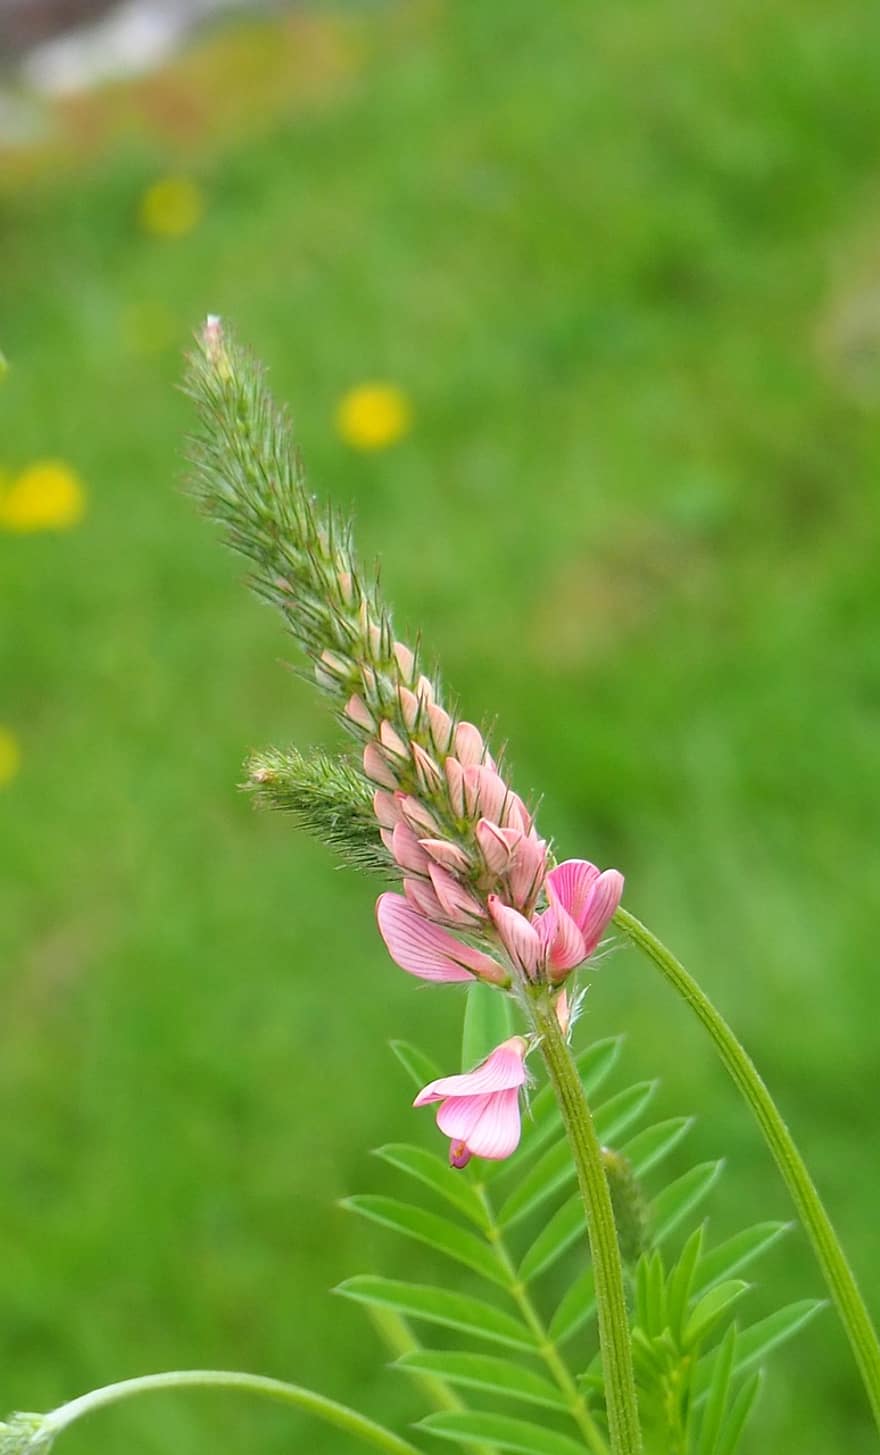 Flower, Blossom, Bloom, Garden, Nature, Plant, Onobrychis Viciifolia, Growth, Botany, Macro, Pink Flower